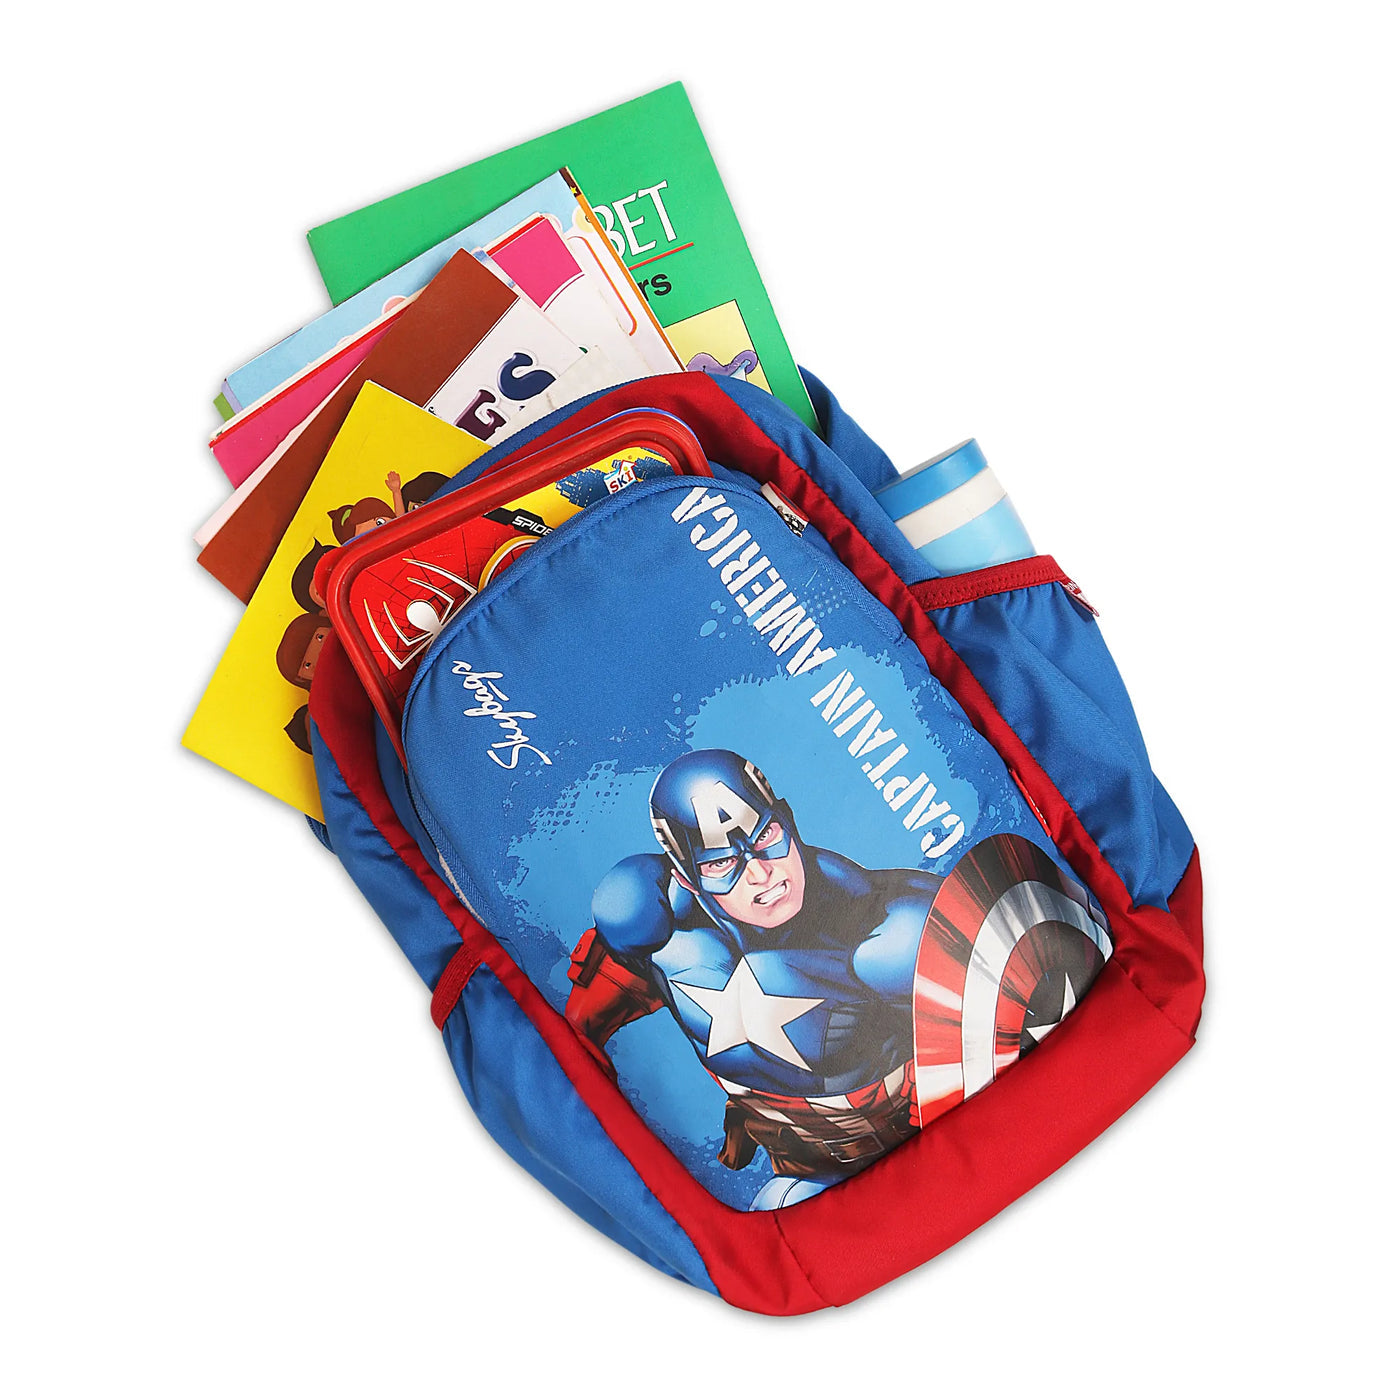 SKYBAGS MARVEL Captain America BACKPACK RED